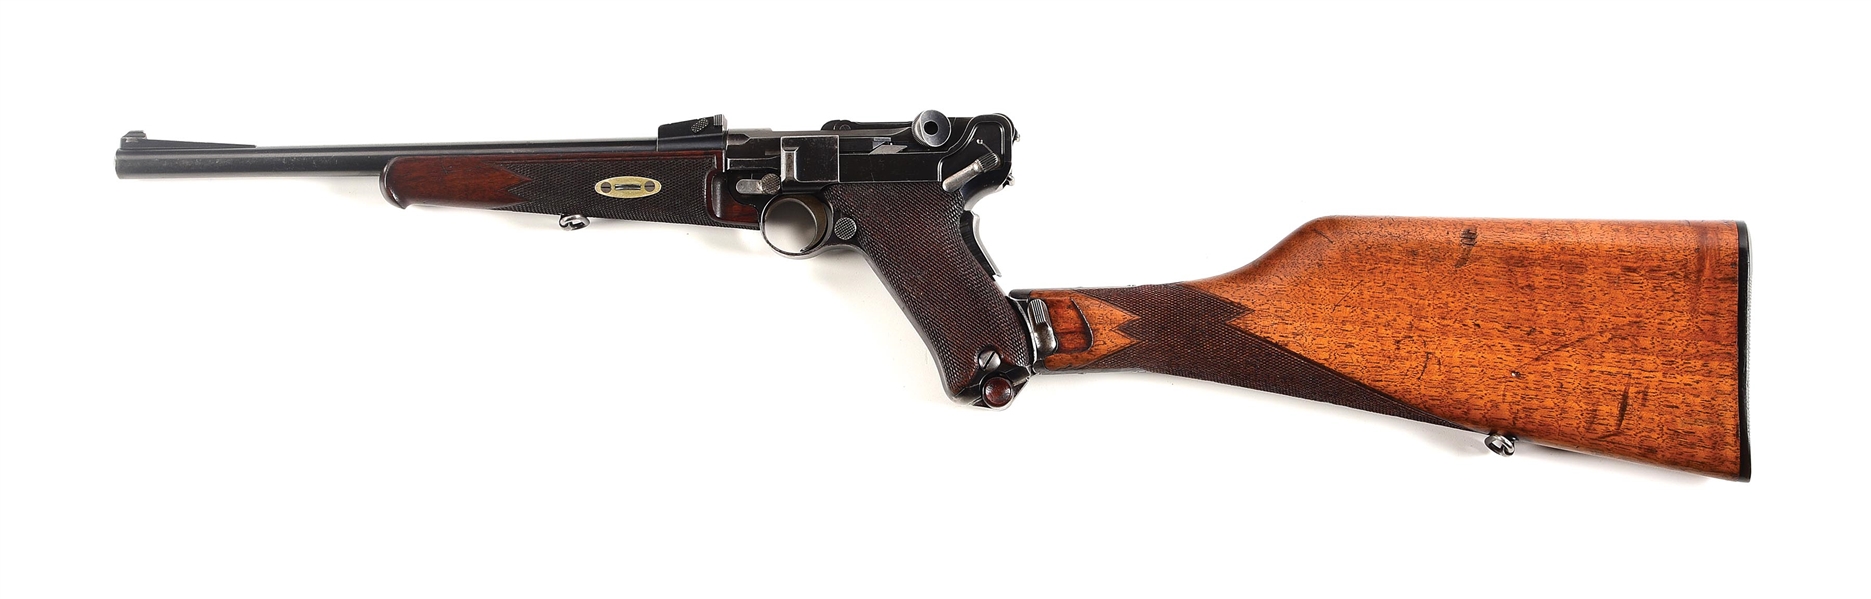 (C) DWM 1902 LUGER CARBINE WITH STOCK AND HOLSTER.